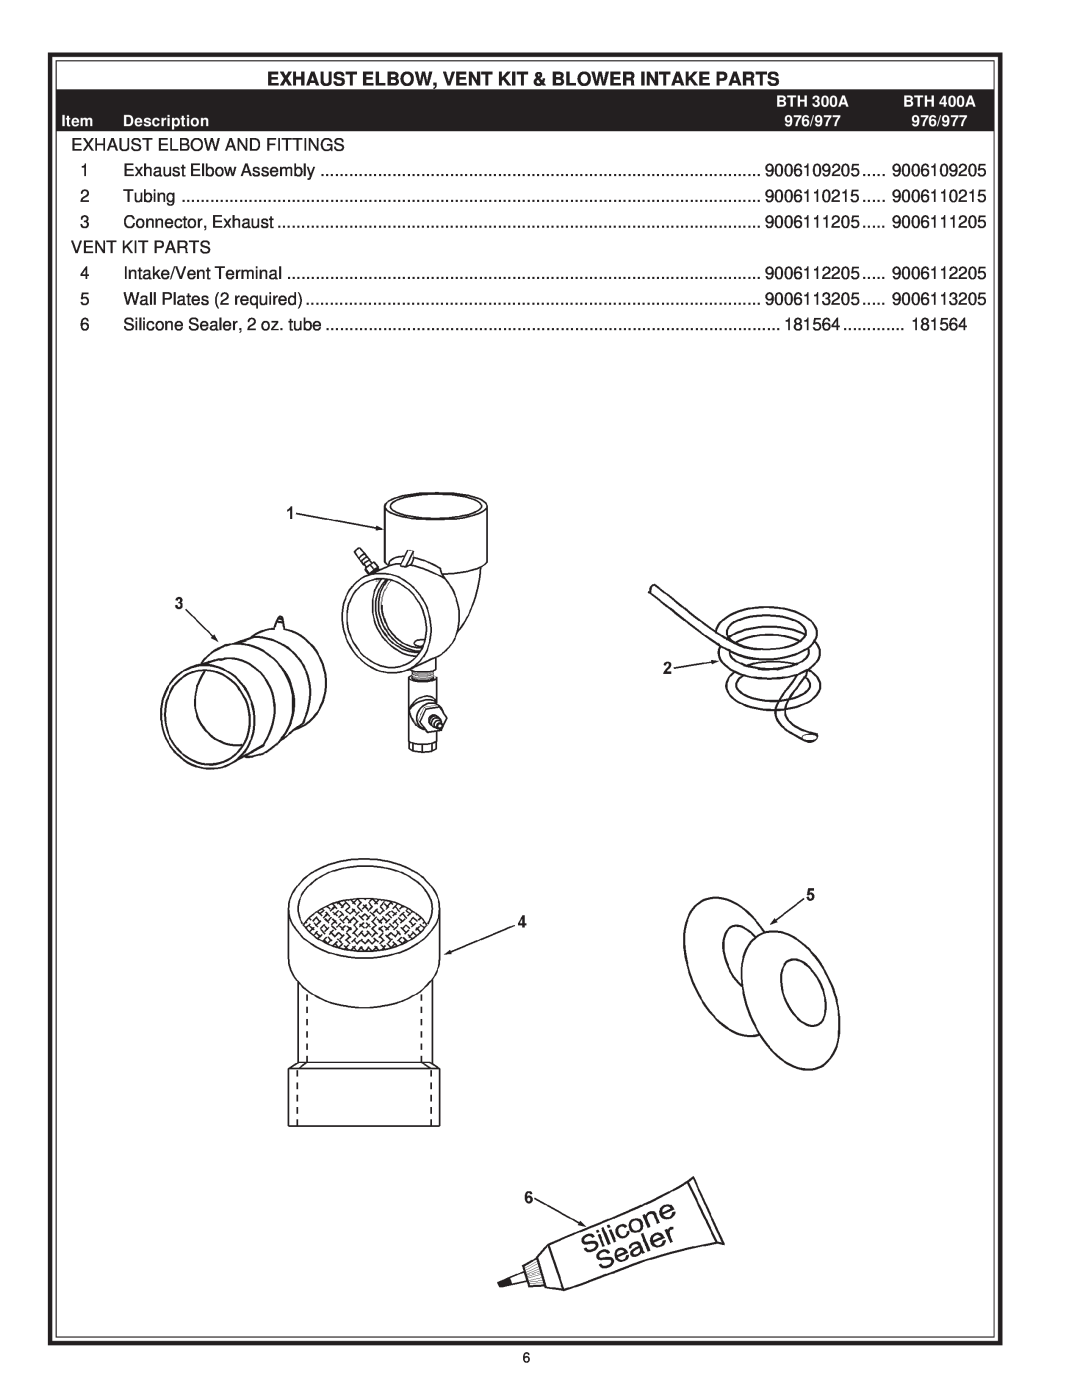 A.O. Smith 976 Series, 977 Series Exhaust Elbow, Vent Kit & Blower Intake Parts, BTH 300A, BTH 400A, Description, 976/977 